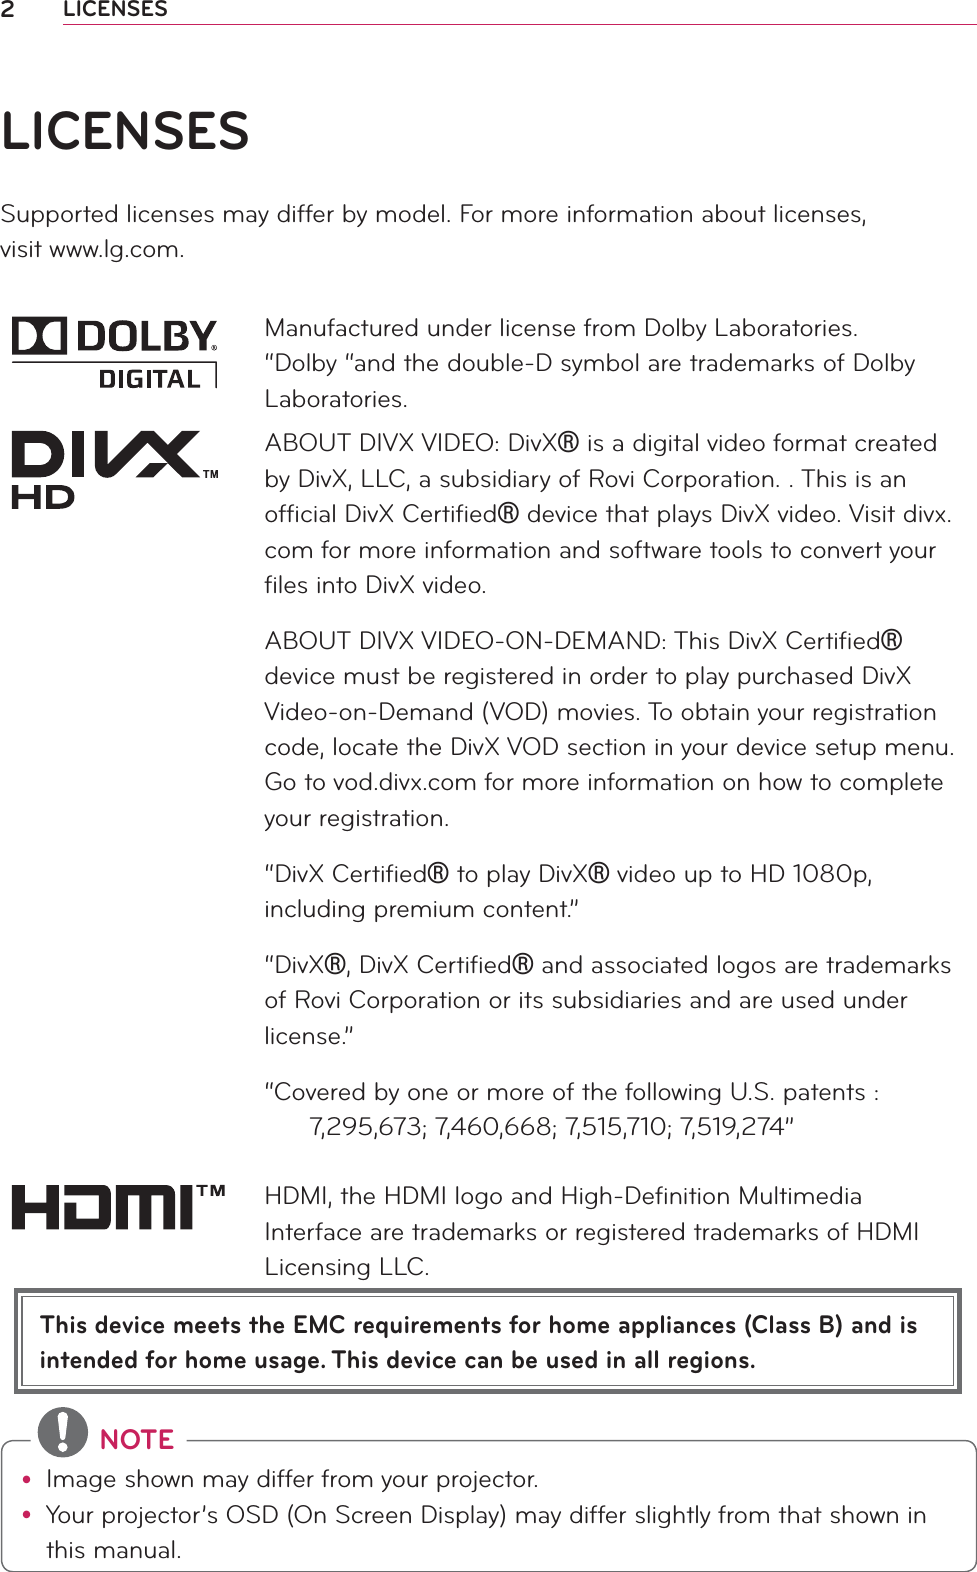 2LICENSESThis device meets the EMC requirements for home appliances (Class B) and is intended for home usage. This device can be used in all regions.LICENSESSupported licenses may differ by model. For more information about licenses,  visit www.lg.com.Manufactured under license from Dolby Laboratories. “Dolby “and the double-D symbol are trademarks of Dolby Laboratories.ABOUT DIVX VIDEO: DivX is a digital video format created by DivX, LLC, a subsidiary of Rovi Corporation. . This is an ofﬁcial DivX Certiﬁed device that plays DivX video. Visit divx.com for more information and software tools to convert your ﬁles into DivX video.ABOUT DIVX VIDEO-ON-DEMAND: This DivX Certiﬁed device must be registered in order to play purchased DivX Video-on-Demand (VOD) movies. To obtain your registration code, locate the DivX VOD section in your device setup menu. Go to vod.divx.com for more information on how to complete your registration. “DivX Certiﬁed to play DivX video up to HD 1080p, including premium content.”“DivX, DivX Certiﬁed and associated logos are trademarks of Rovi Corporation or its subsidiaries and are used under license.”“Covered by one or more of the following U.S. patents :        7,295,673; 7,460,668; 7,515,710; 7,519,274”HDMI, the HDMI logo and High-Deﬁnition Multimedia Interface are trademarks or registered trademarks of HDMI Licensing LLC. NOTEy Image shown may differ from your projector.y Your projector’s OSD (On Screen Display) may differ slightly from that shown in this manual.